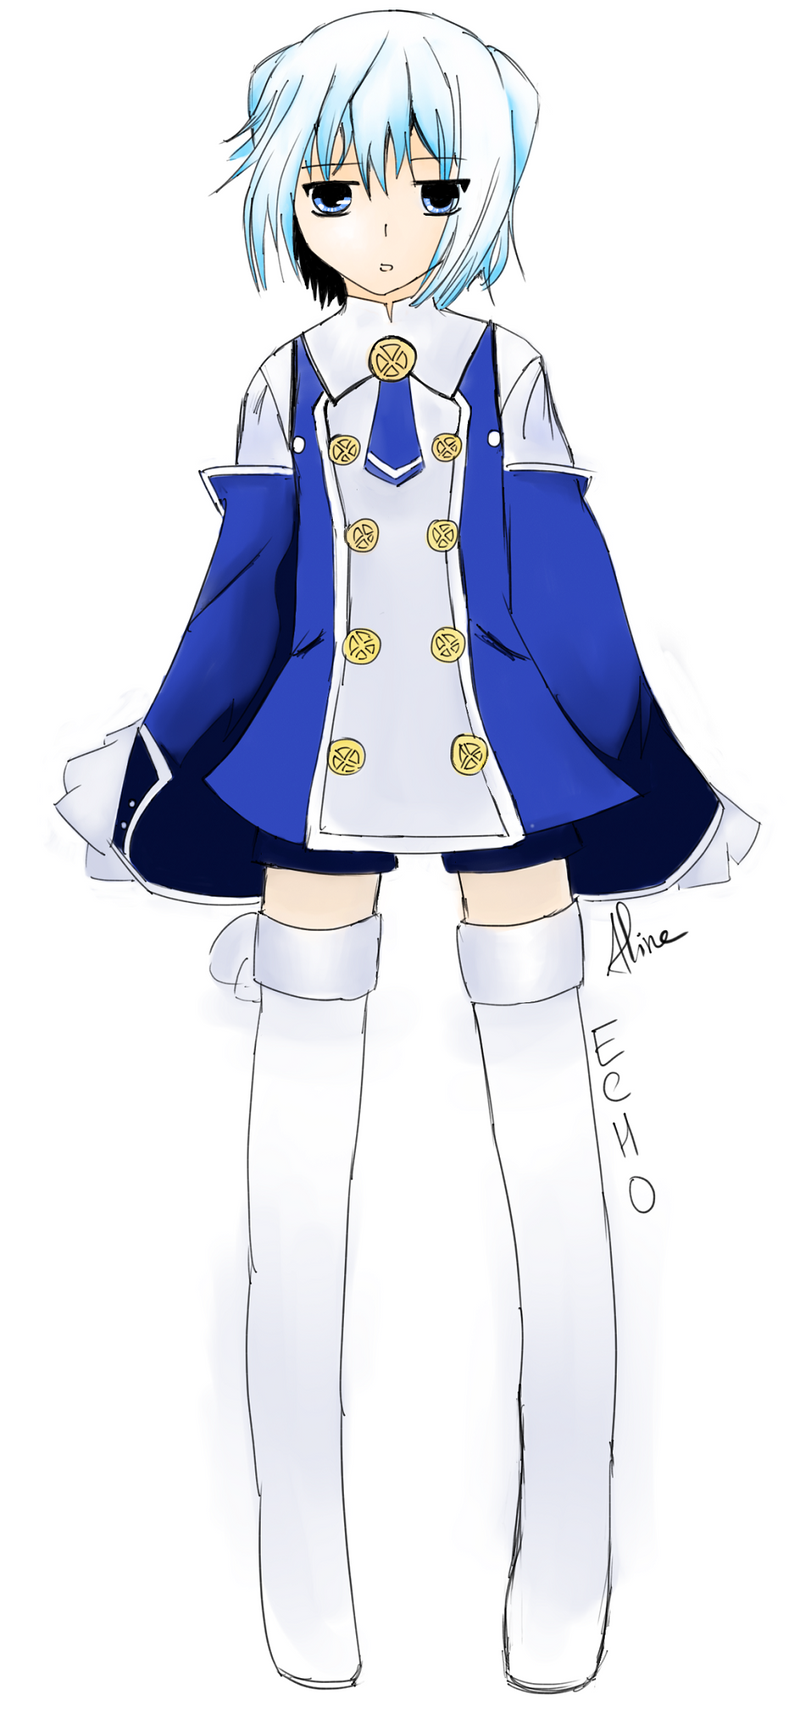 echo_from_pandora_hearts_by_lenaylei-d5ci9t8.png